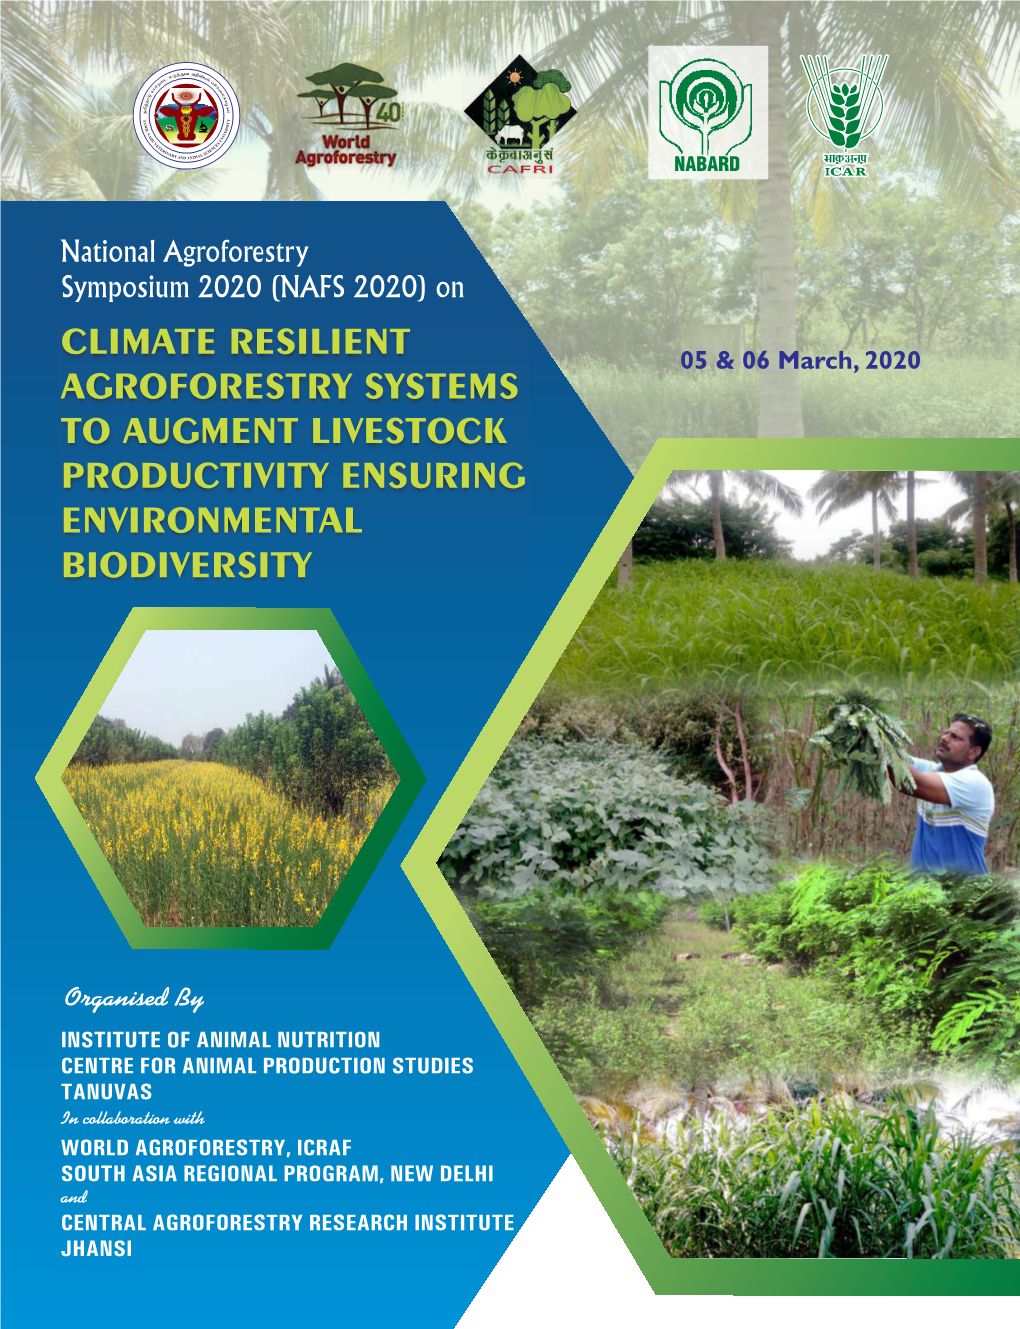 Climate Resilient Agroforestry Systems to Augment Livestock Productivity Ensuring Environmental Biodiversity